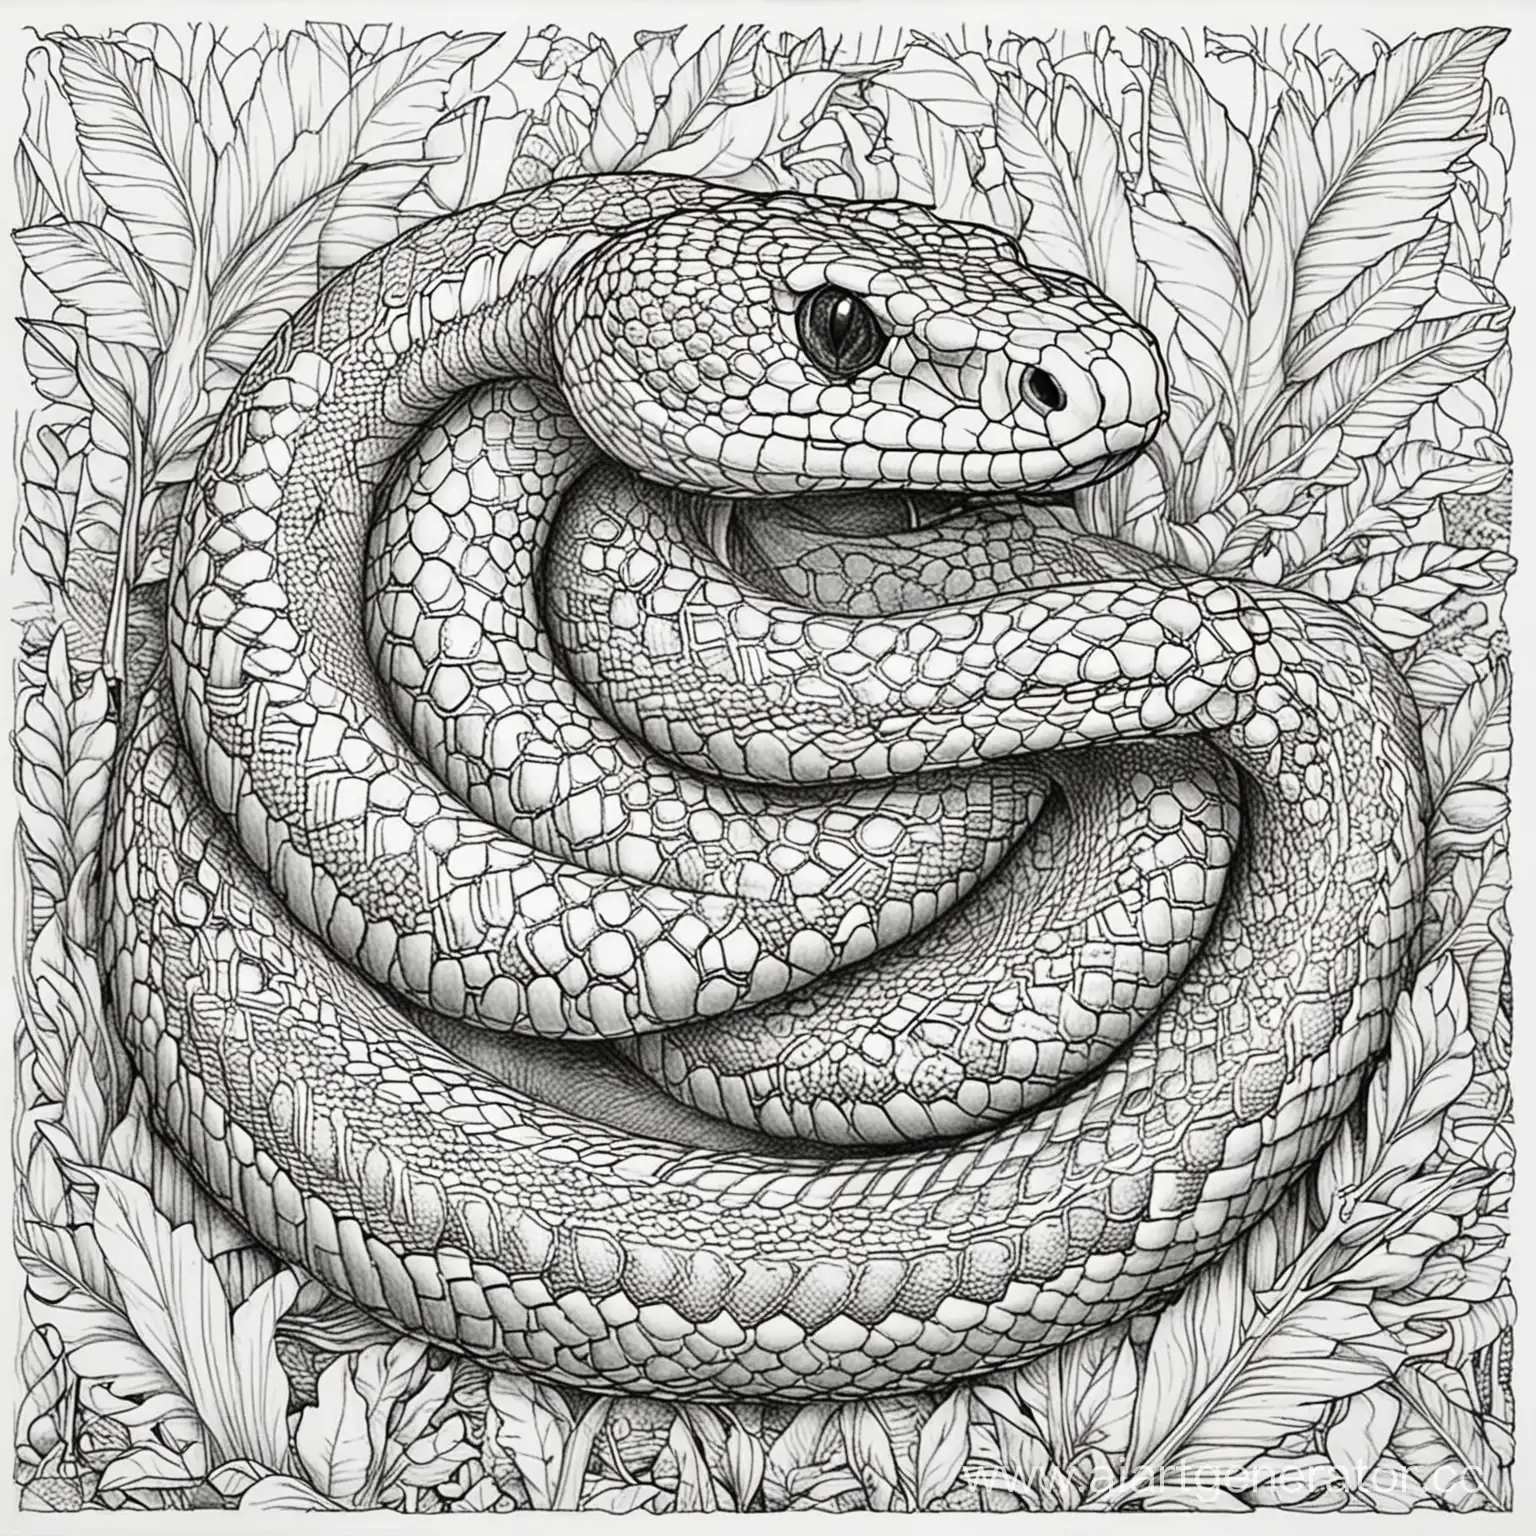 Illustrated-Snake-Coloring-Book-Pages-for-Relaxation-and-Creativity